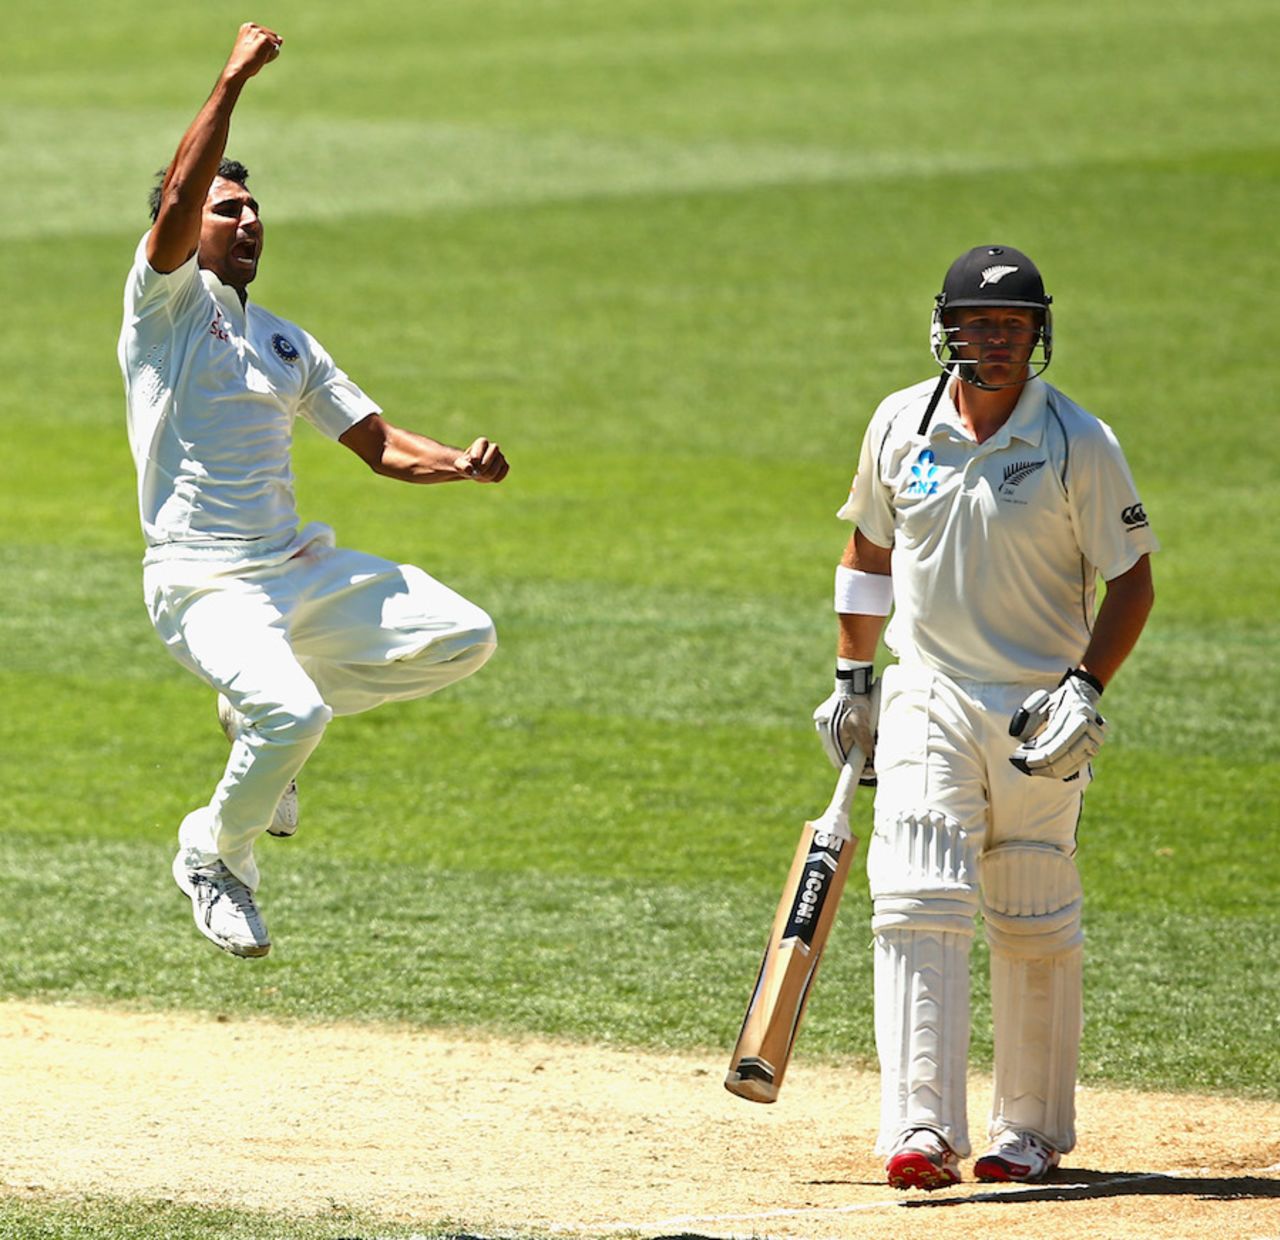 Mohammed Shami leaps after dismissing Corey Anderson, New Zealand v India, 1st Test, Auckland, 3rd day, February 8, 2014